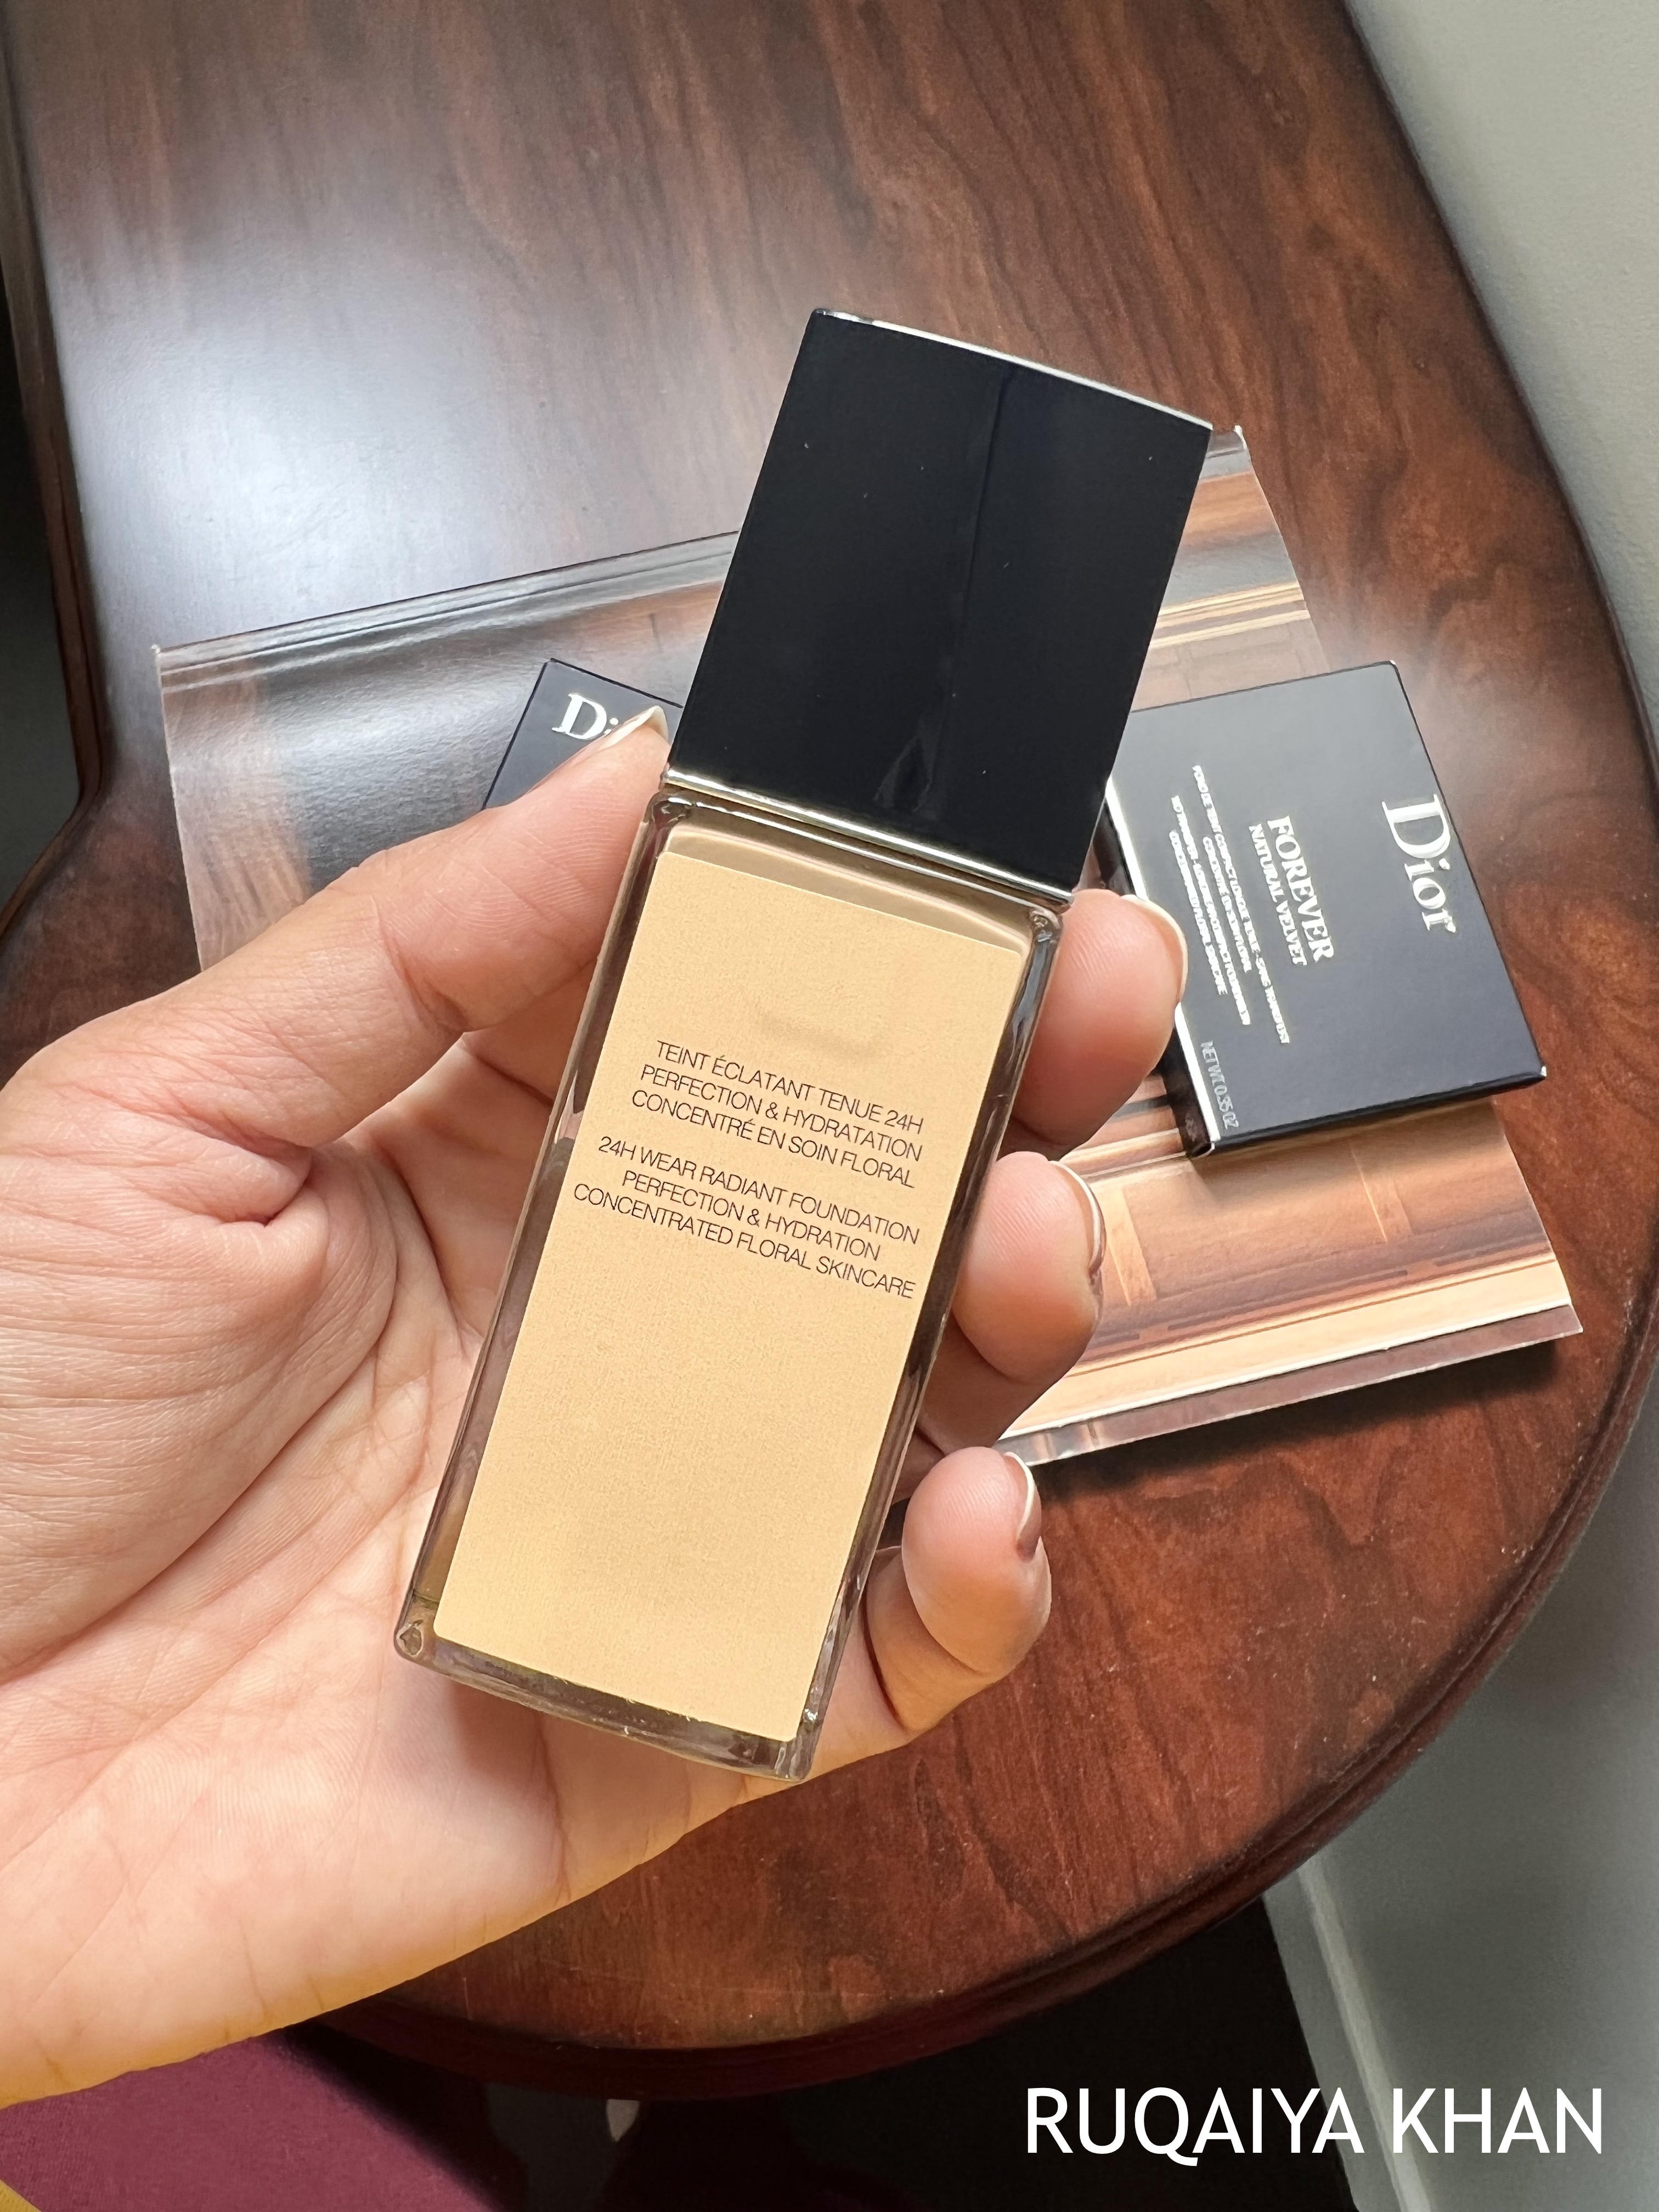 DIOR FACE AND BODY FOUNDATION SWATCHES  SHADE MATCH COMPARISON TO DIOR  FOUNDATIONS  Foundation swatches Dior foundation Body foundation